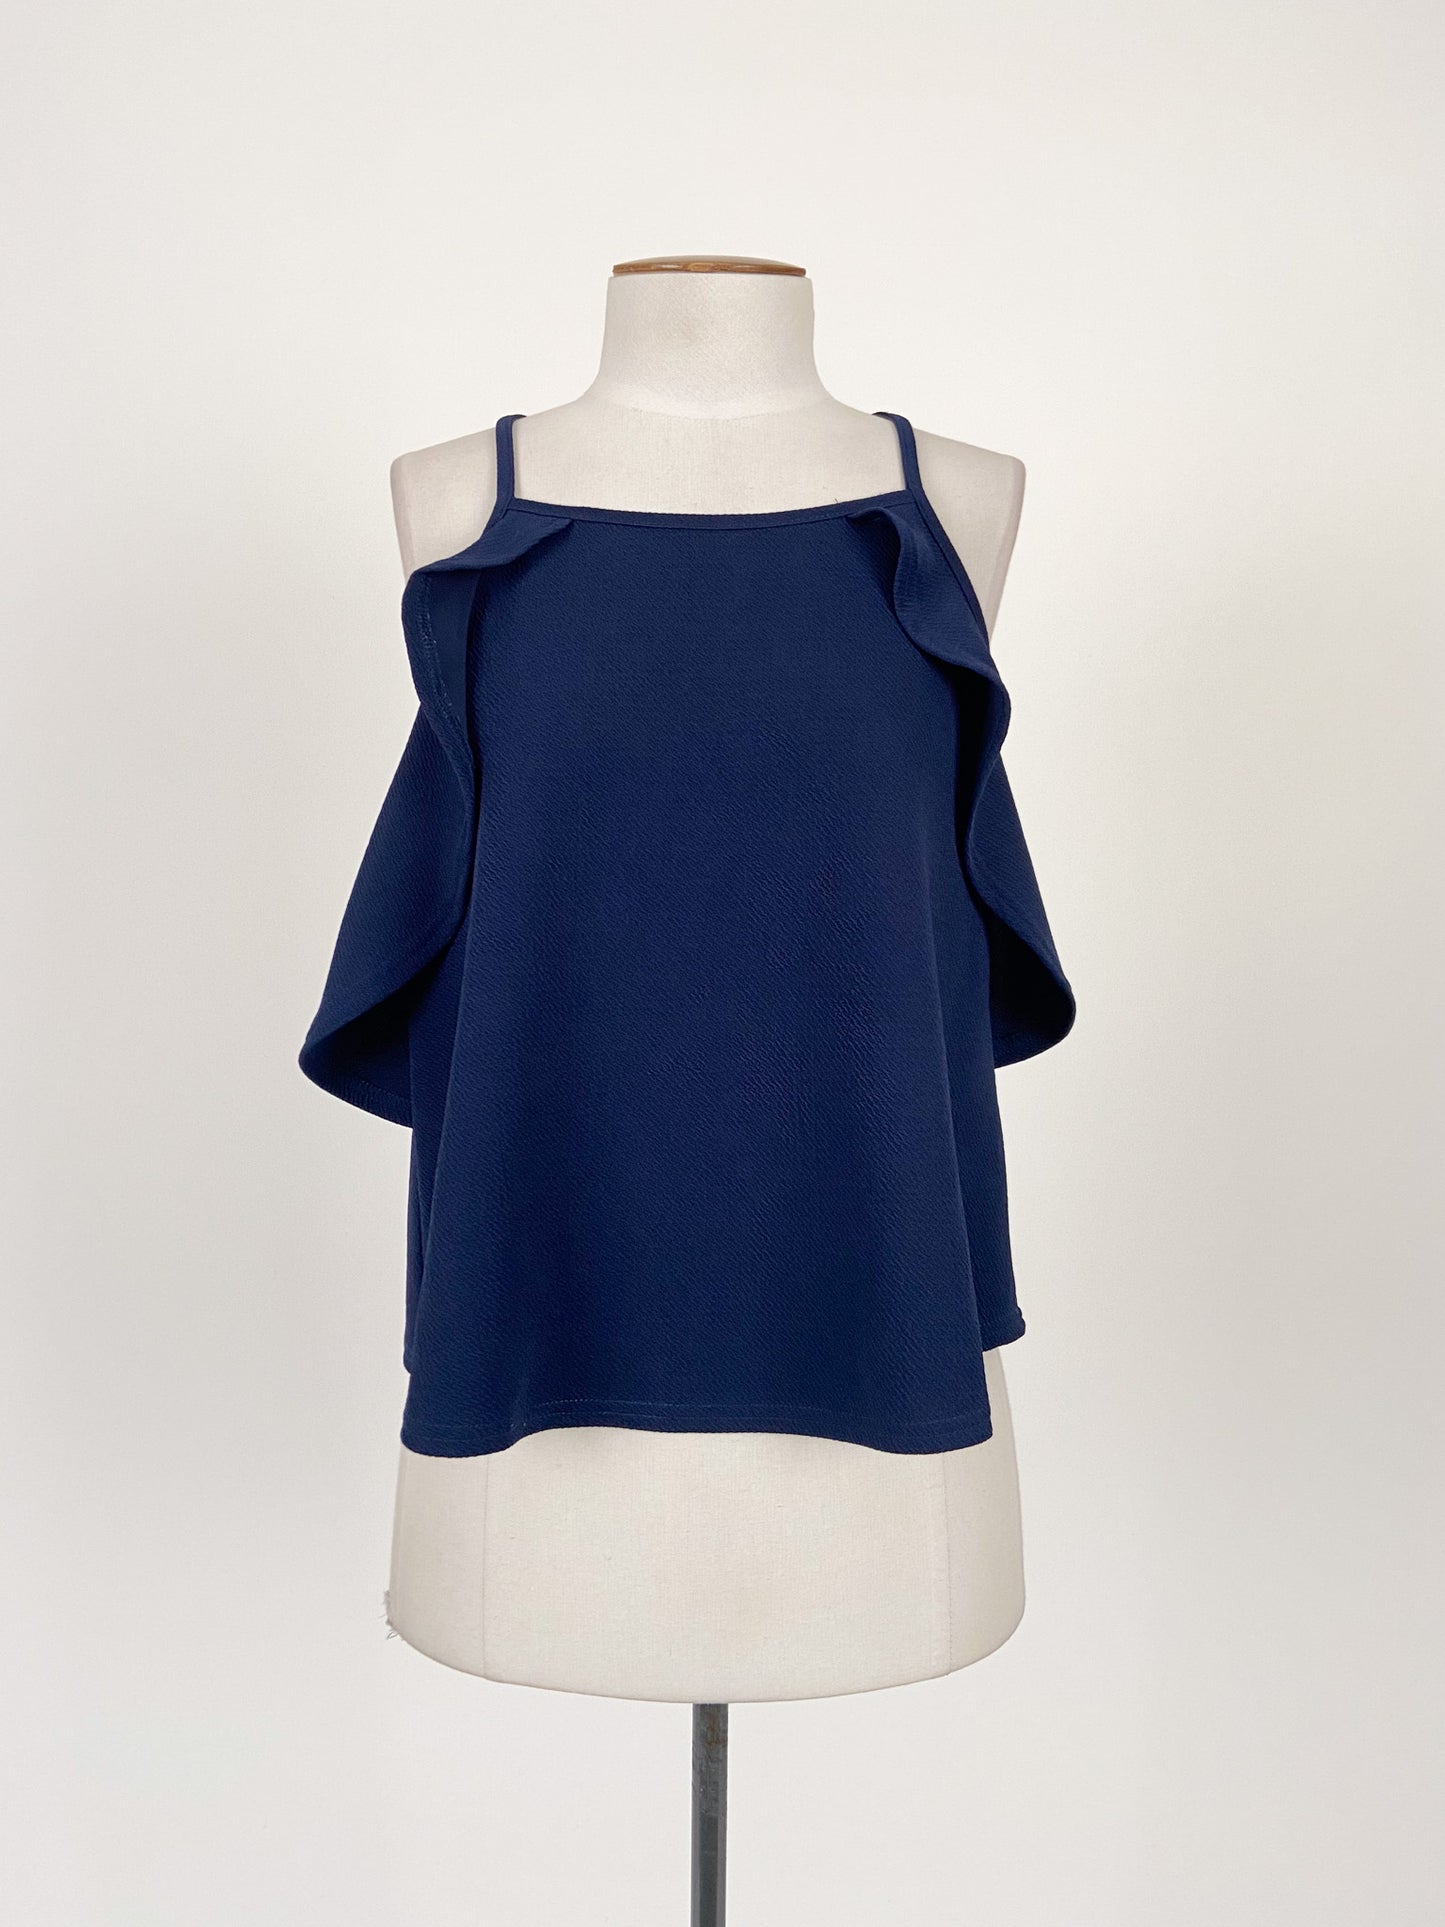 Kitschen | Navy Casual/Cocktail Top | Size S